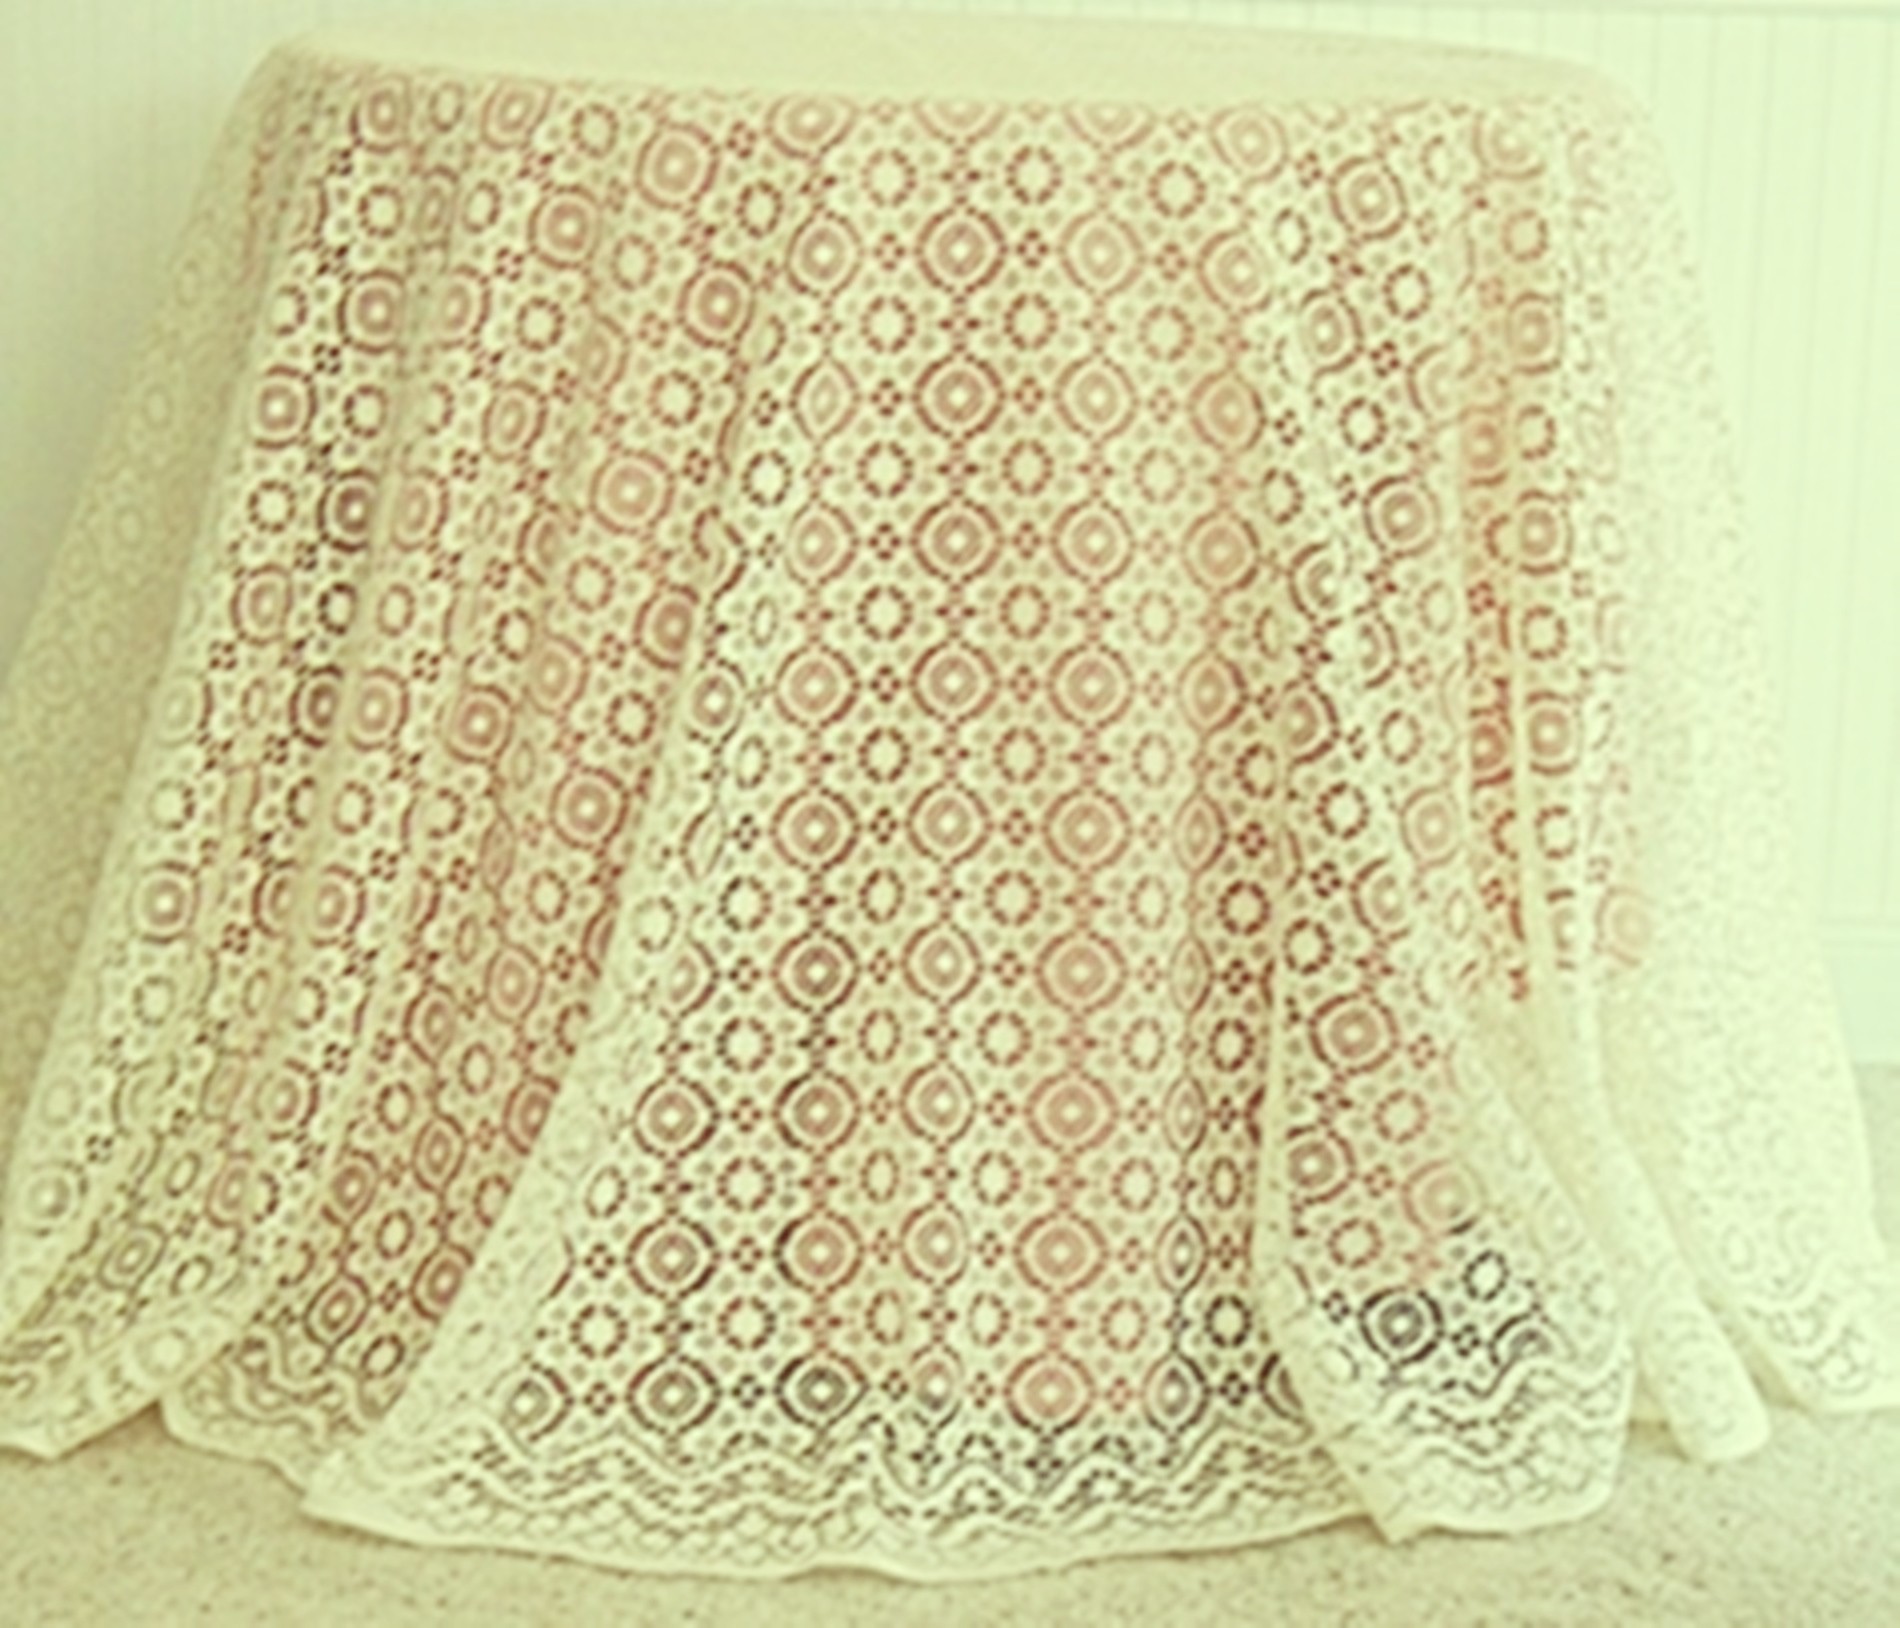 Tablecloth Nova 90 Inch Round Ivory, Round Lace Tablecloths 90 Inch